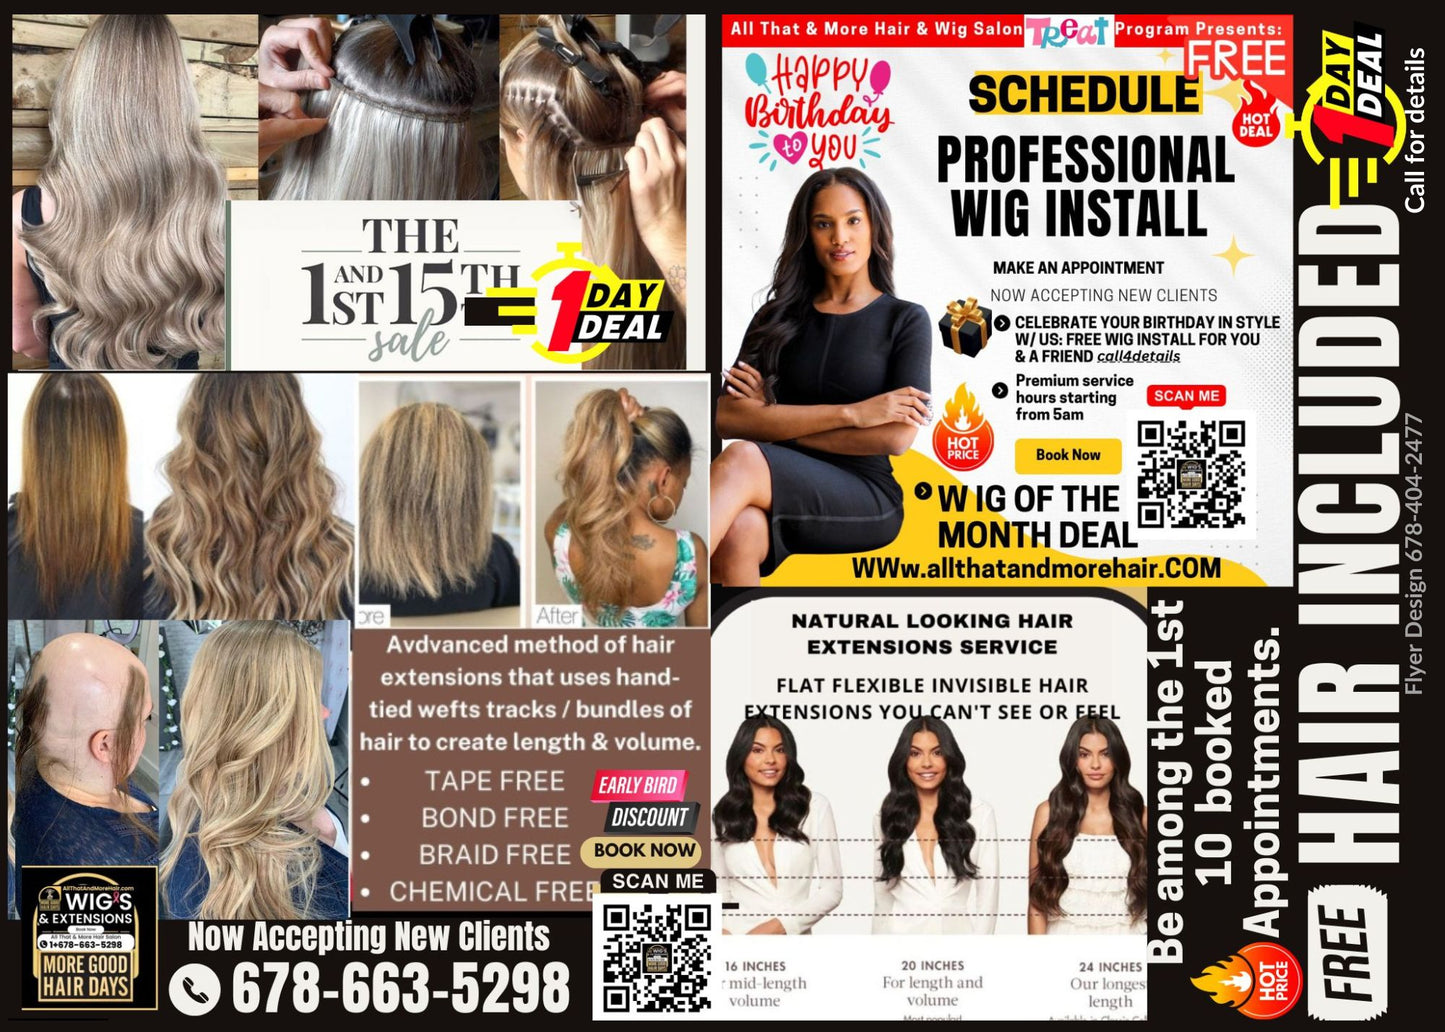 Revive & Restore: Hair Consultation & Scalp Evaluation + Hair Extension/Alternative Solutions Consultation (In-Person Showroom Visit)